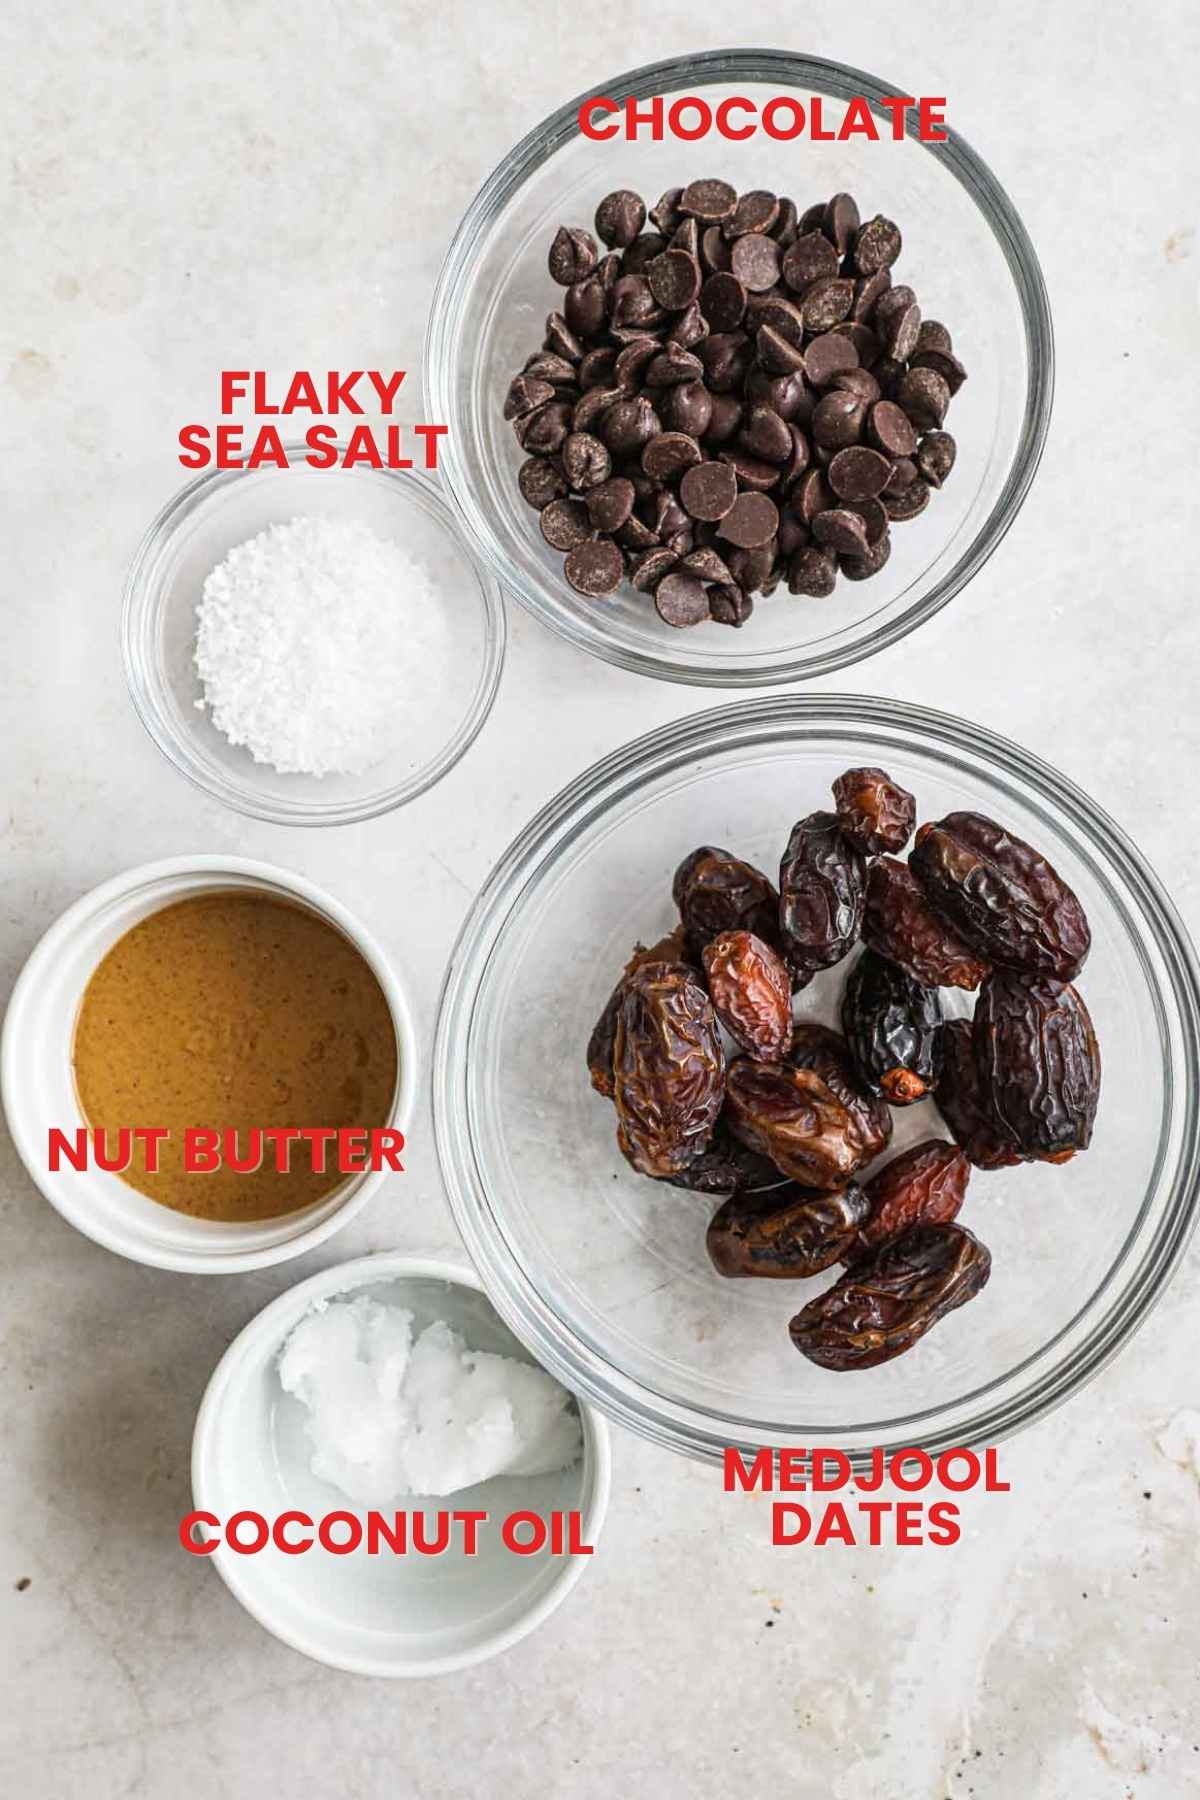 Ingredients to make chocolate covered vegan dates, including chocolate, medjool dates, nut butter, flaky sea salt, and coconut oil.